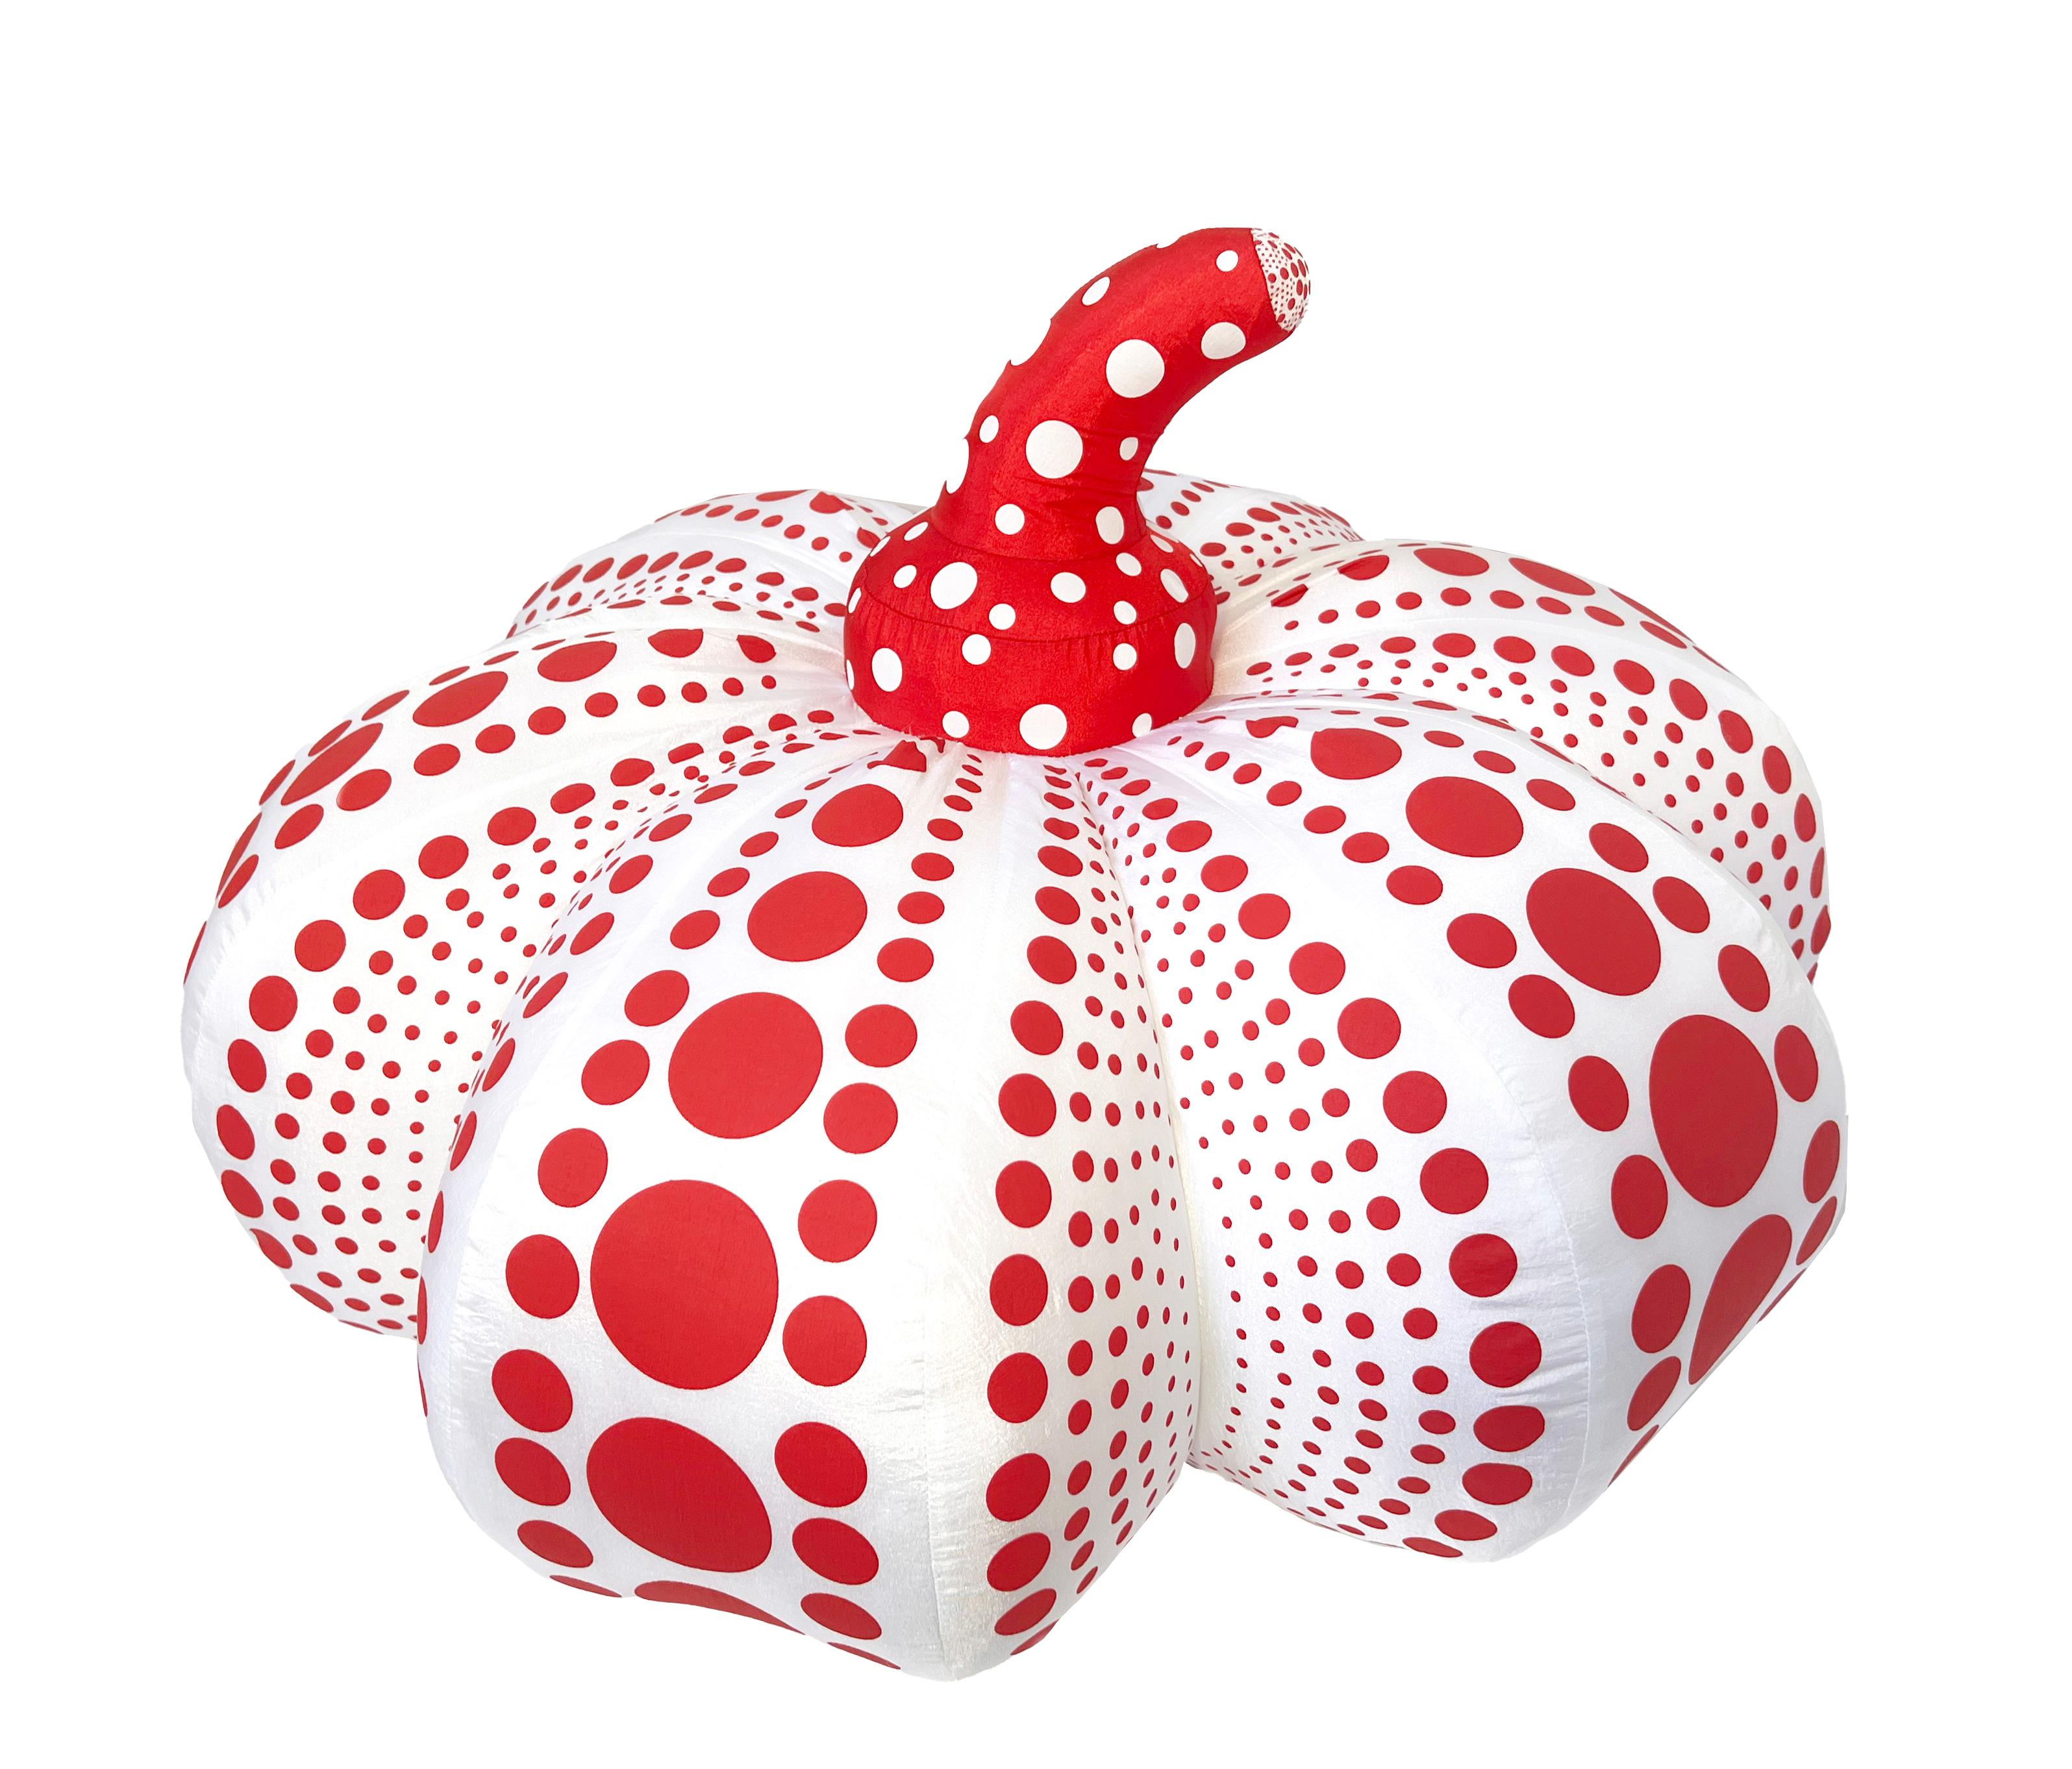 Yayoi Kusama Pumpkins (set of 2 large plush pumpkins):
An iconic, vibrantly colored pop art set - these large Kusama plush (soft) pumpkins feature the universal polka dot patterns and bold colors for which the artist is perhaps best known. Kusama